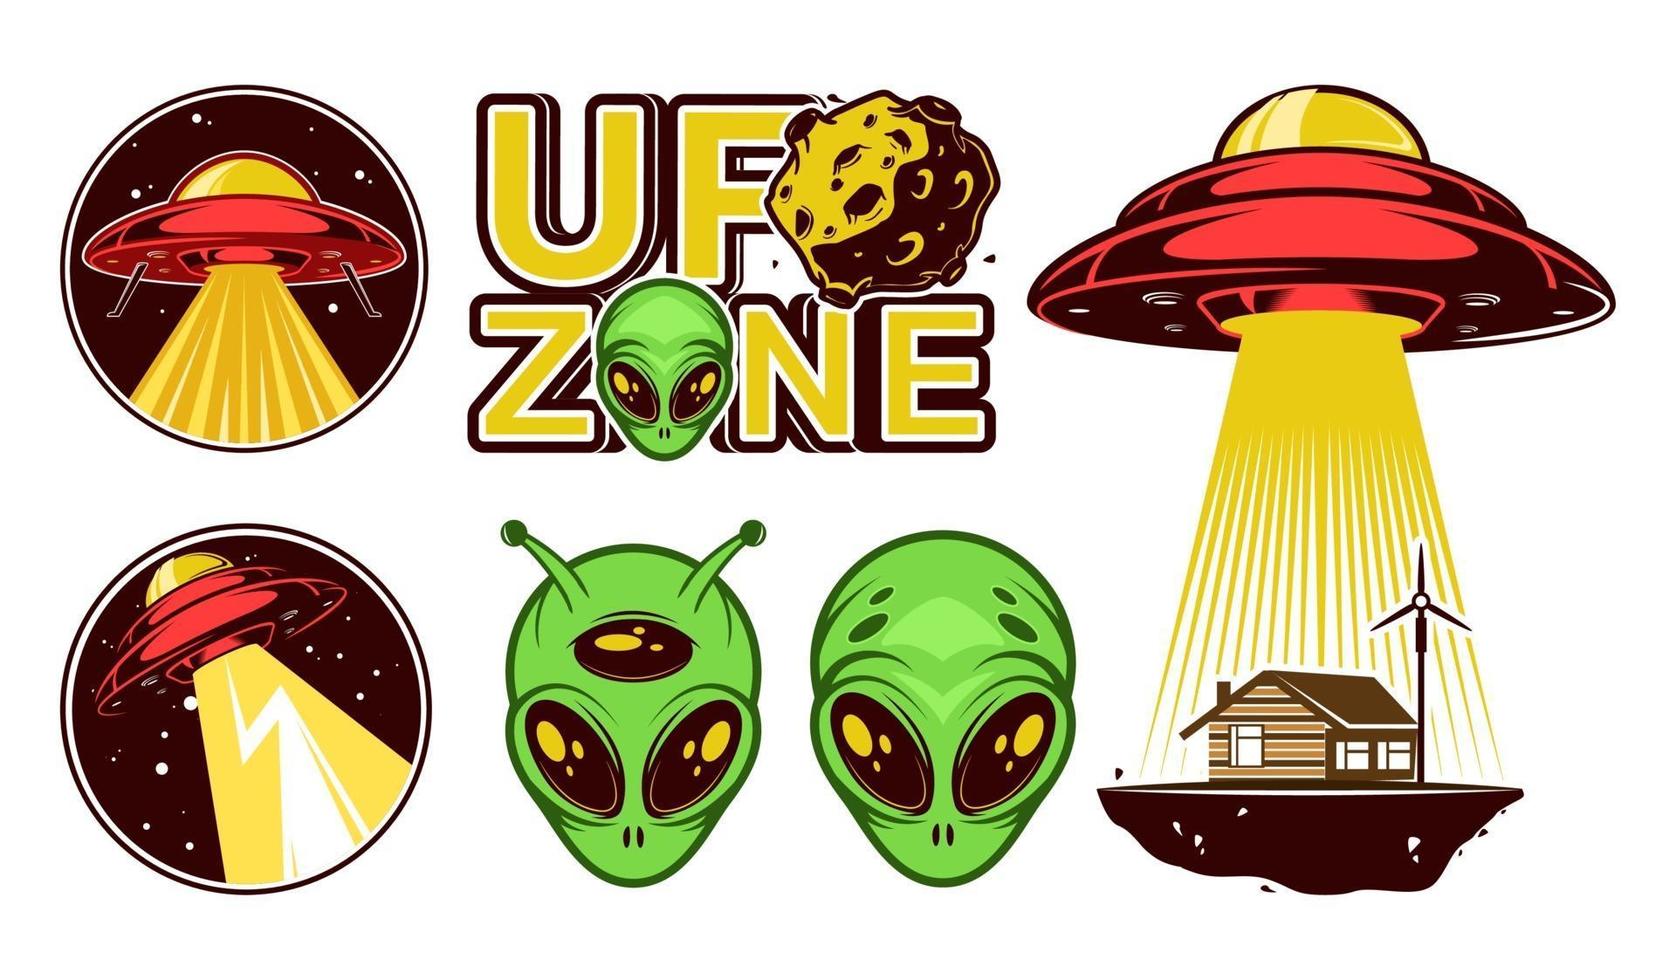 Big Aliens logo set. Ufo Day. Colorful badges with spaceships. Vector design